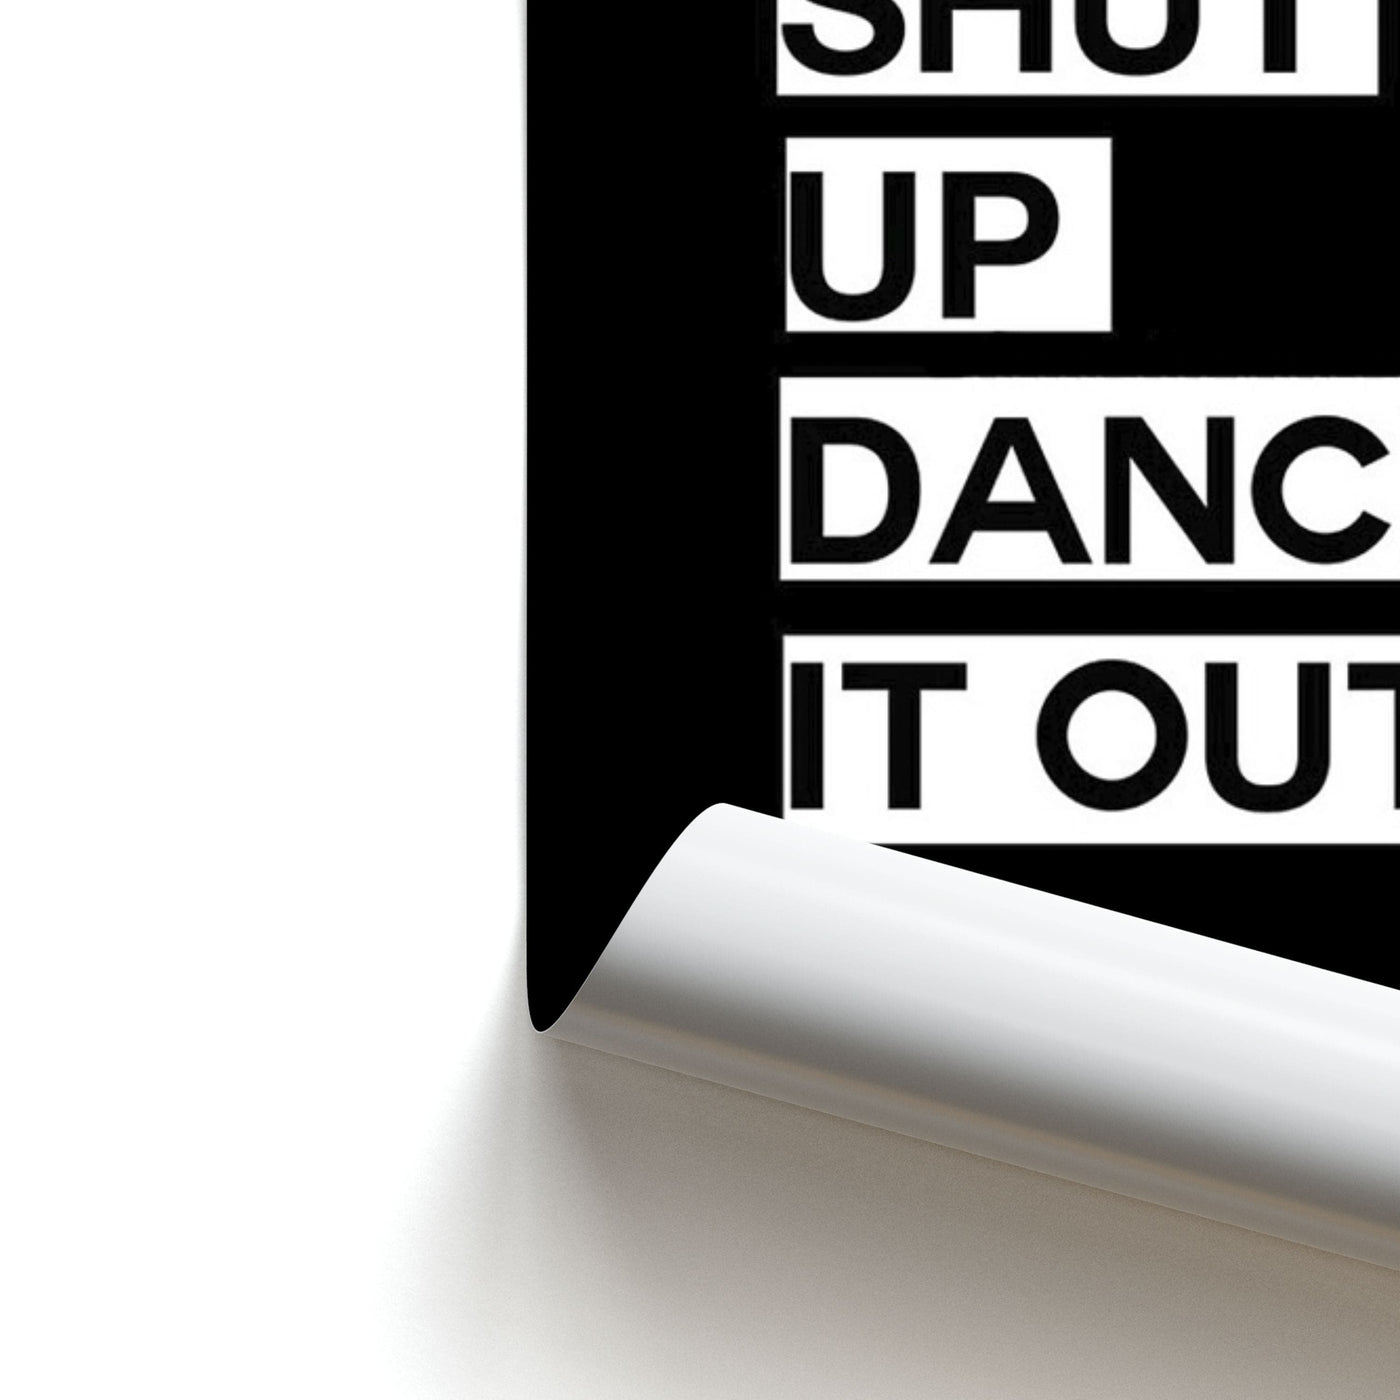 Shut Up Dance It Out - Grey's Anatomy Poster